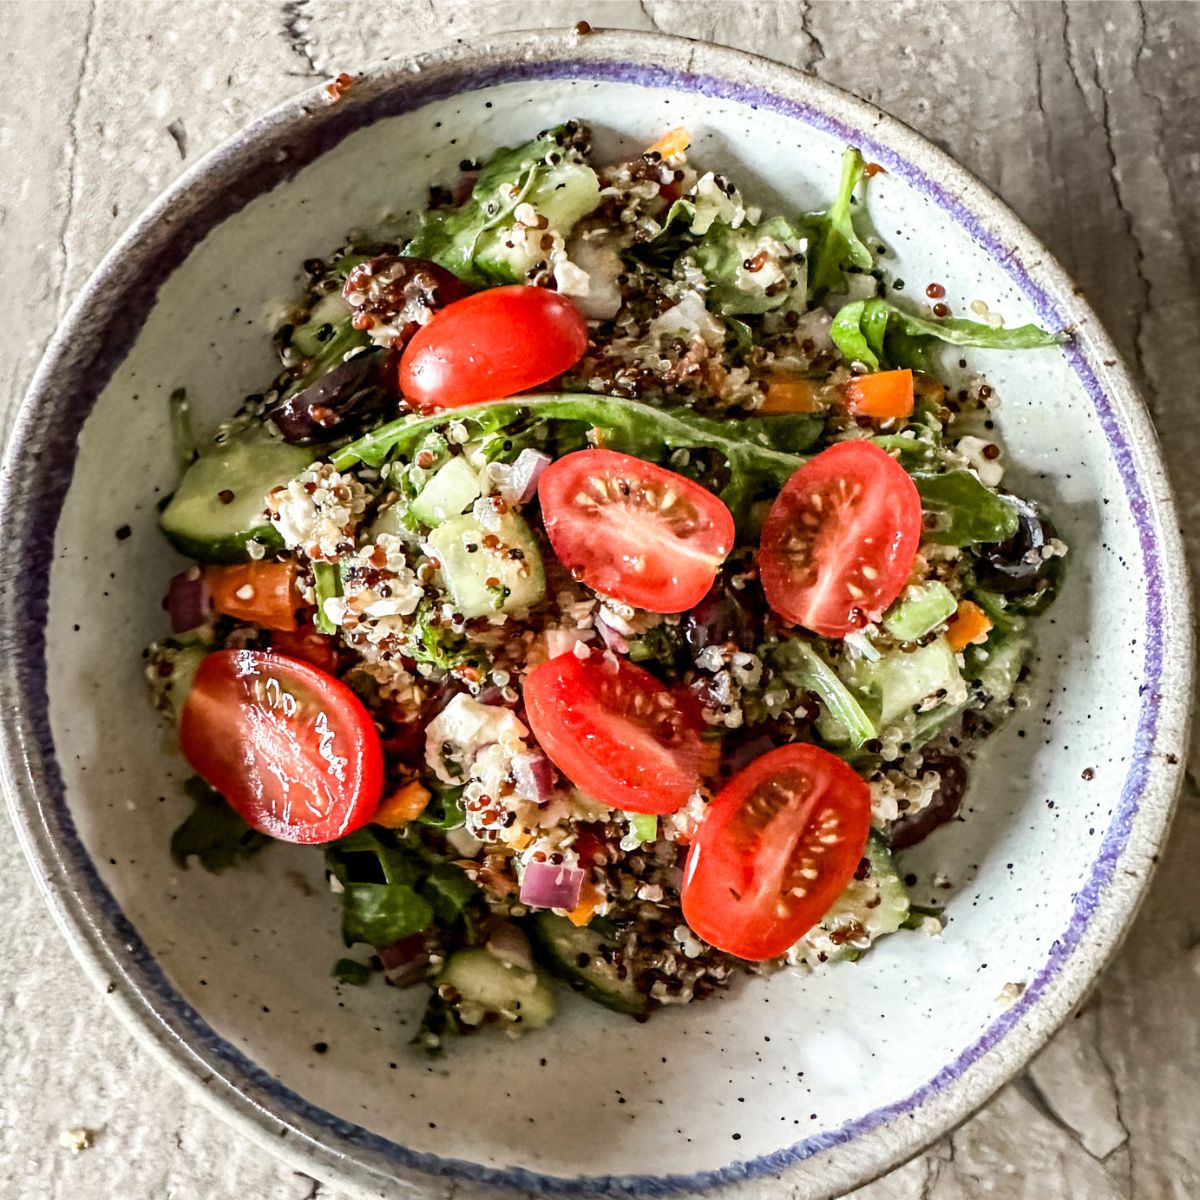 arugula and quinoa salad being served in a white dish.